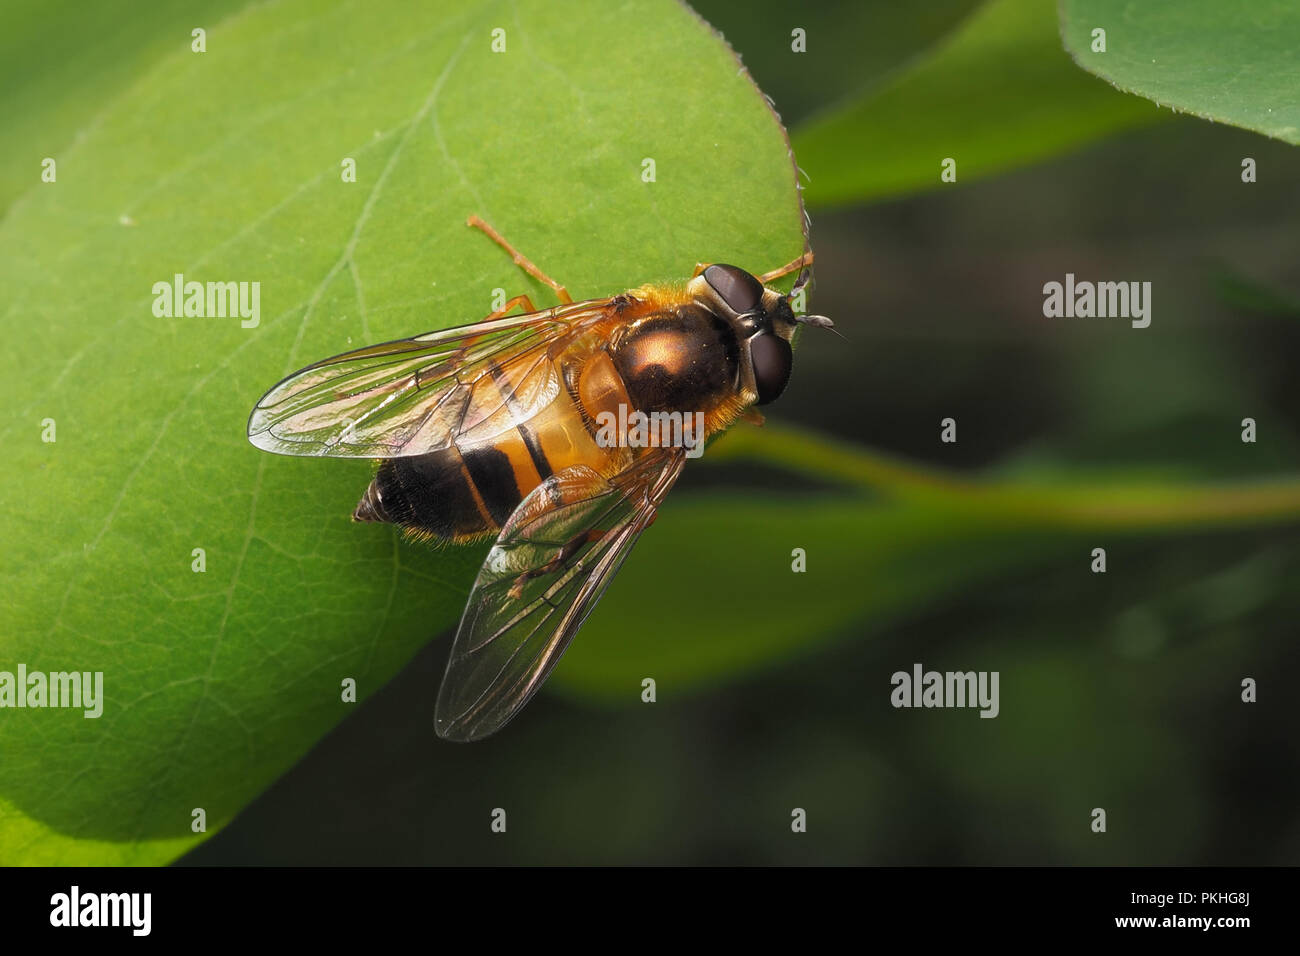 Hoverfly (Epistrophe eligans) female perched on plant leaf. Tipperary, Ireland Stock Photo